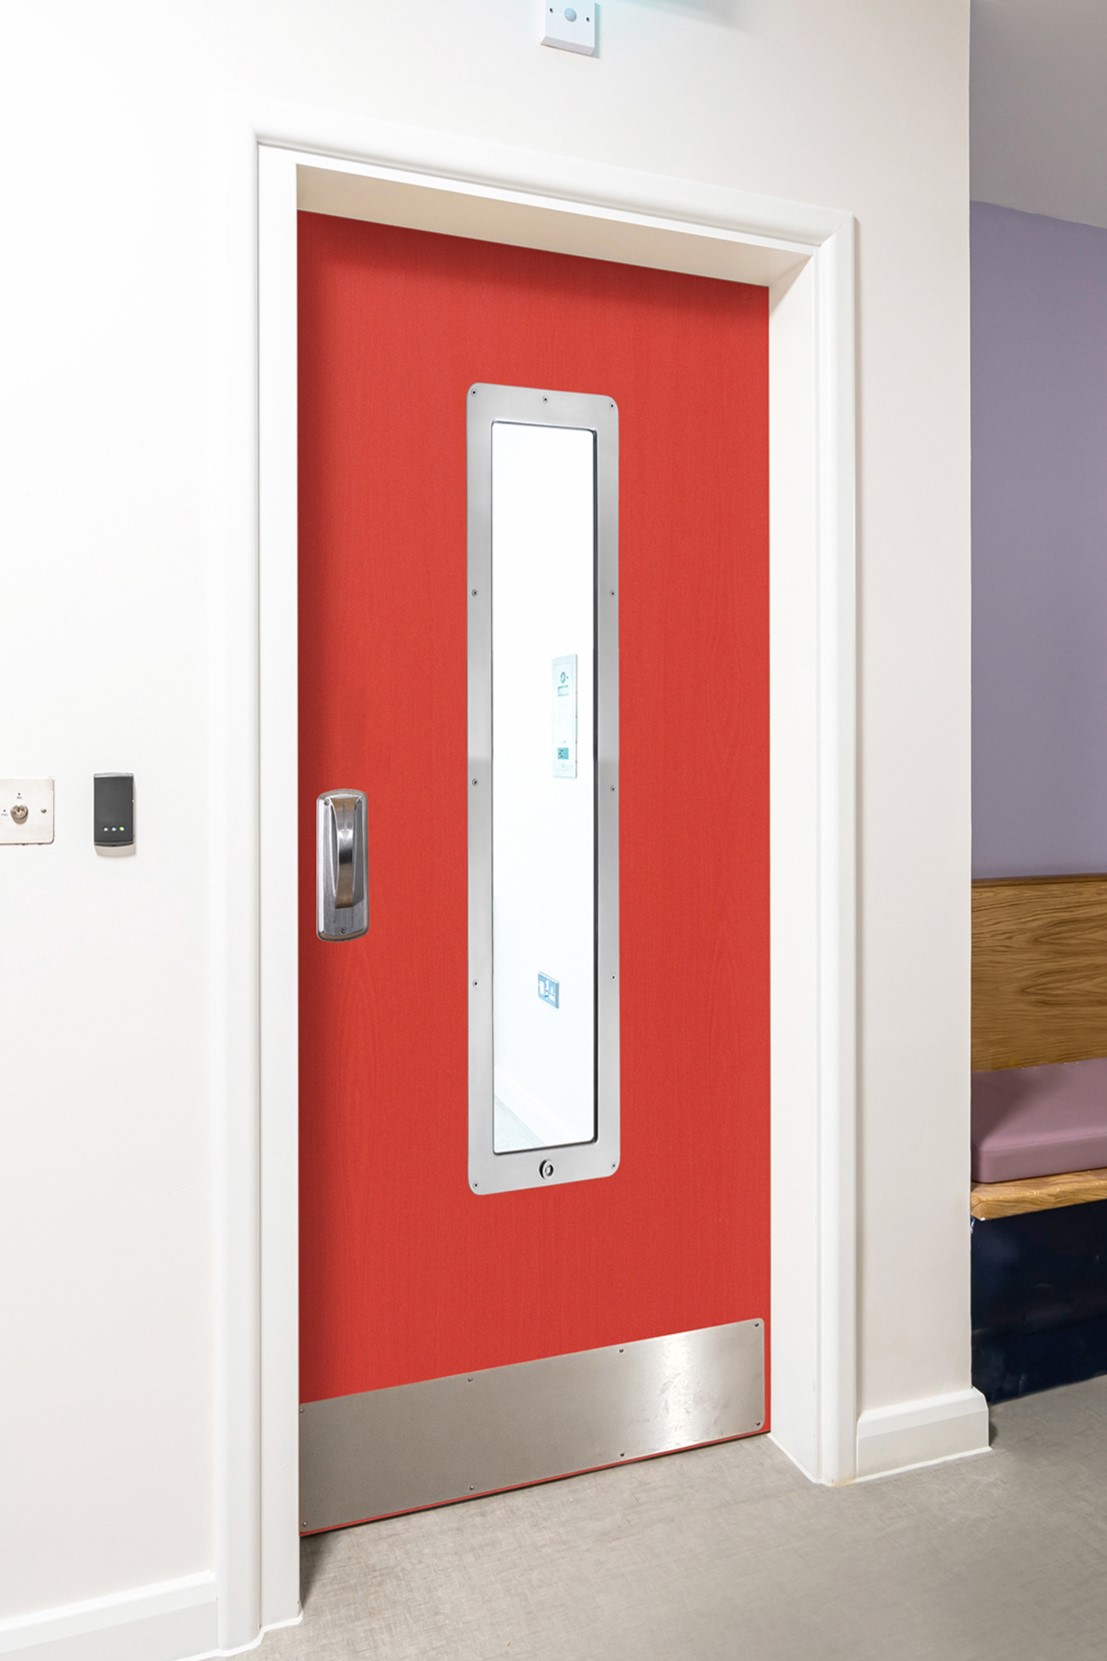 Ligature Resistant Doors by Kingsway Group USA.